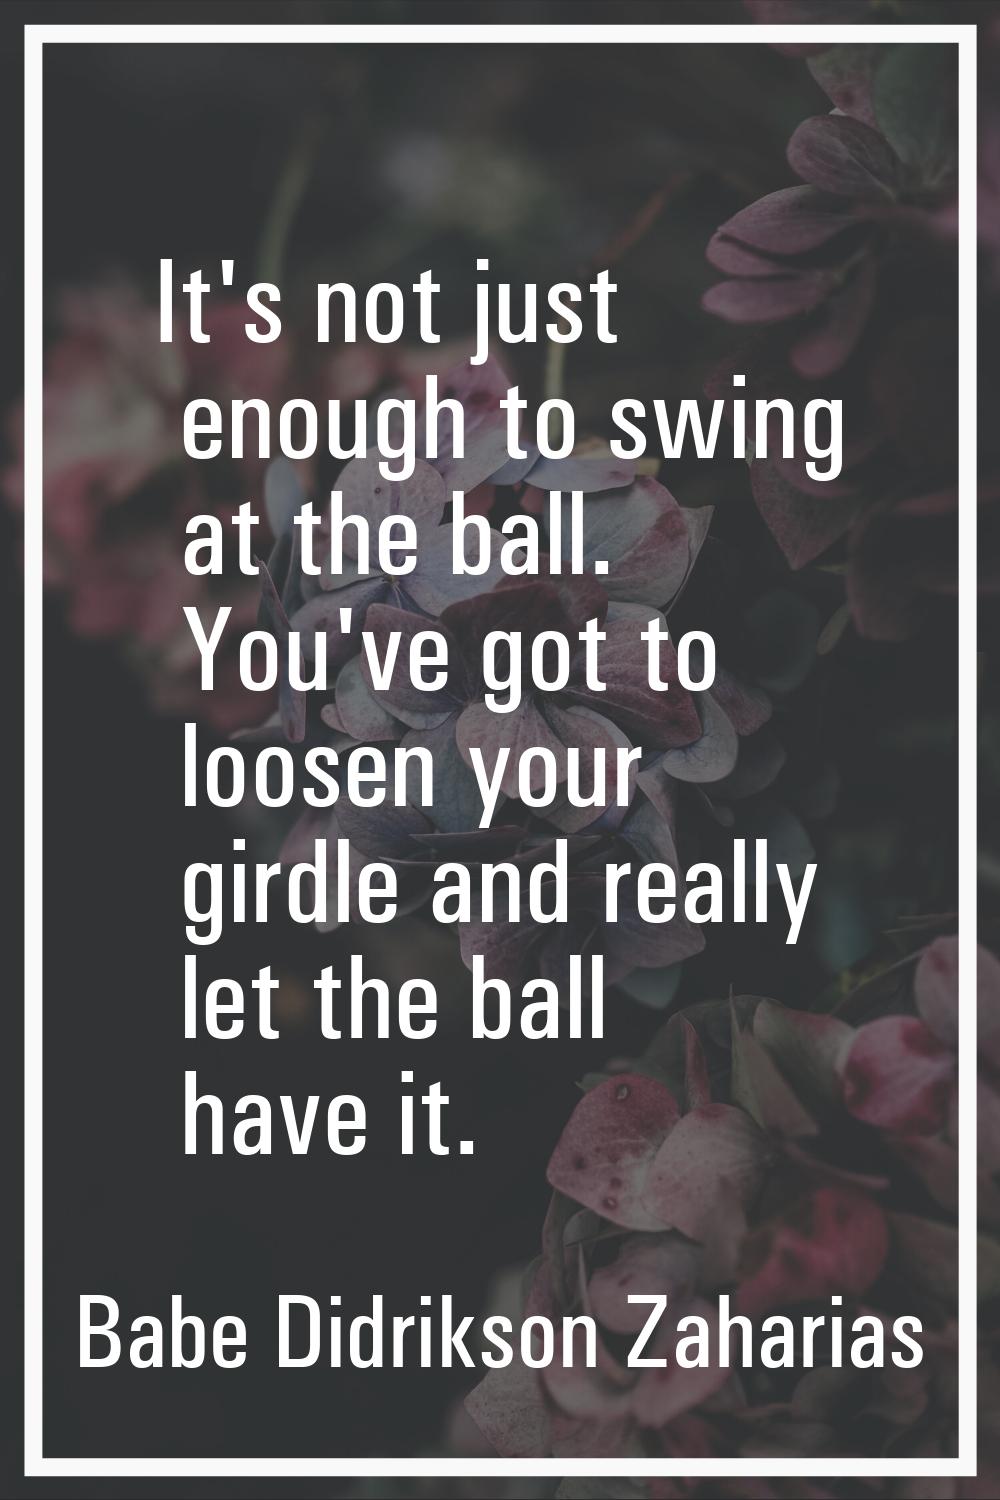 It's not just enough to swing at the ball. You've got to loosen your girdle and really let the ball